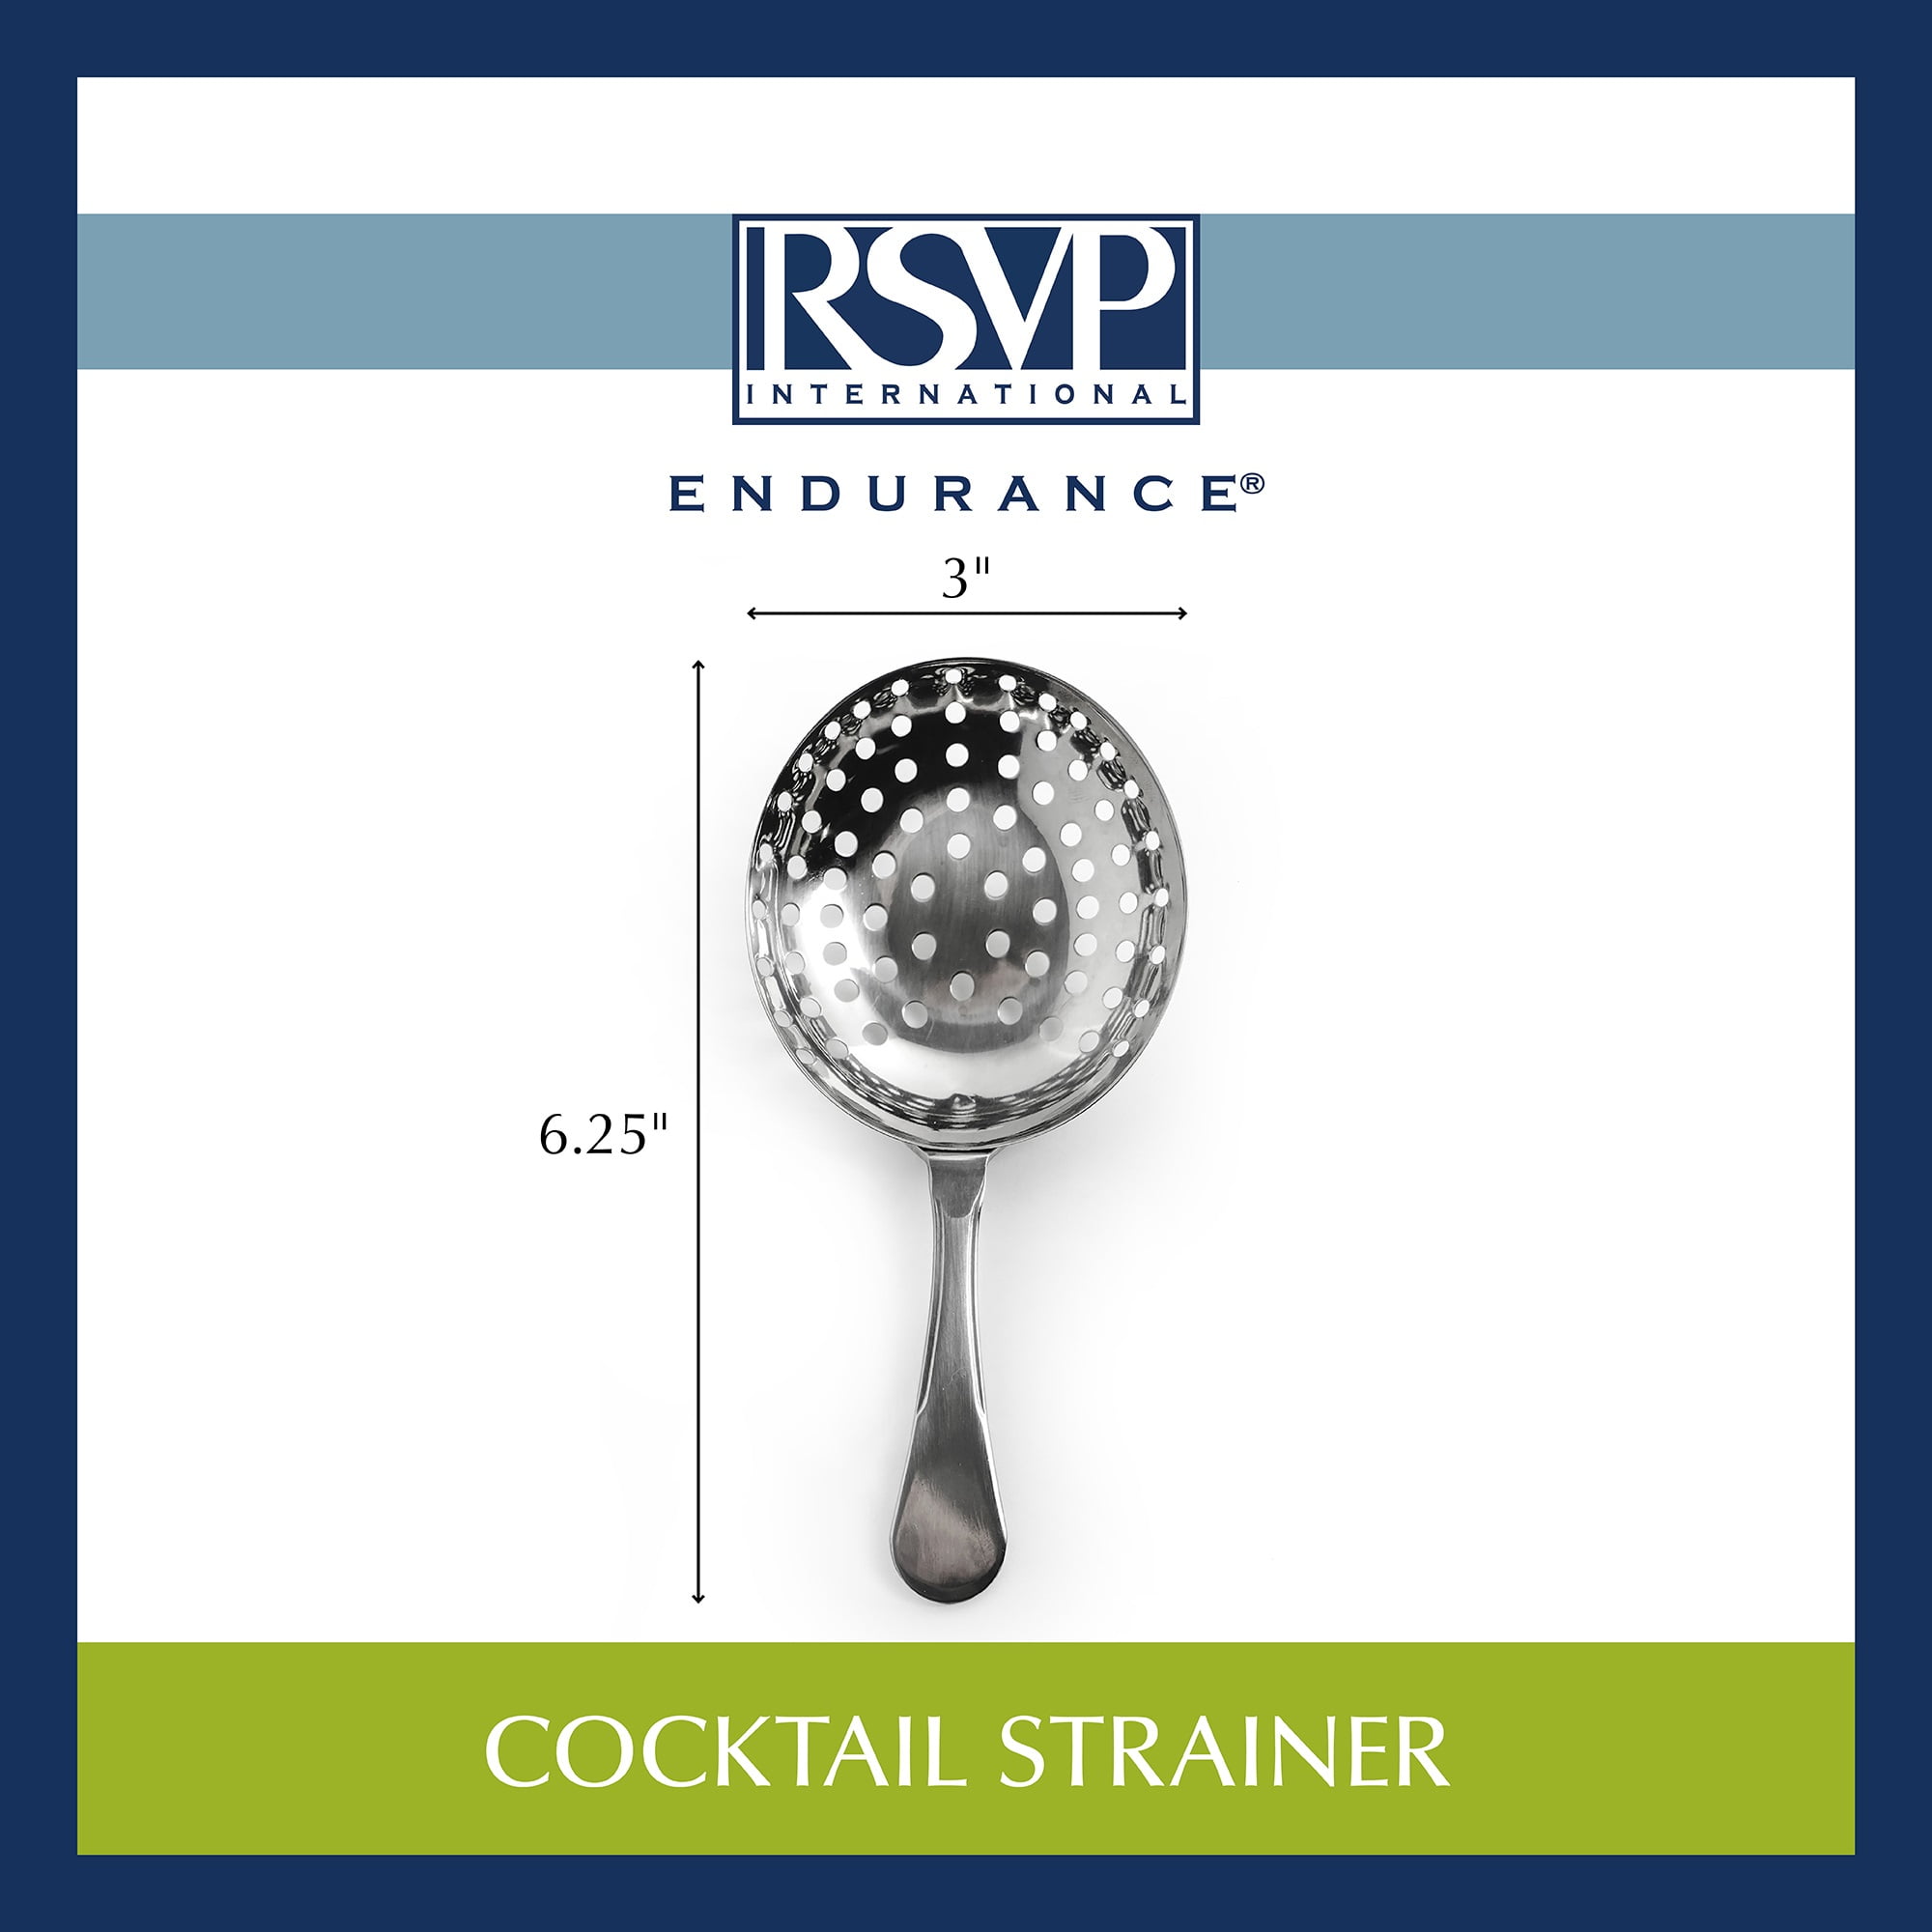 RSVP Endurance Tiny Salt and Condiment Spoon, Polished Stainless Steel